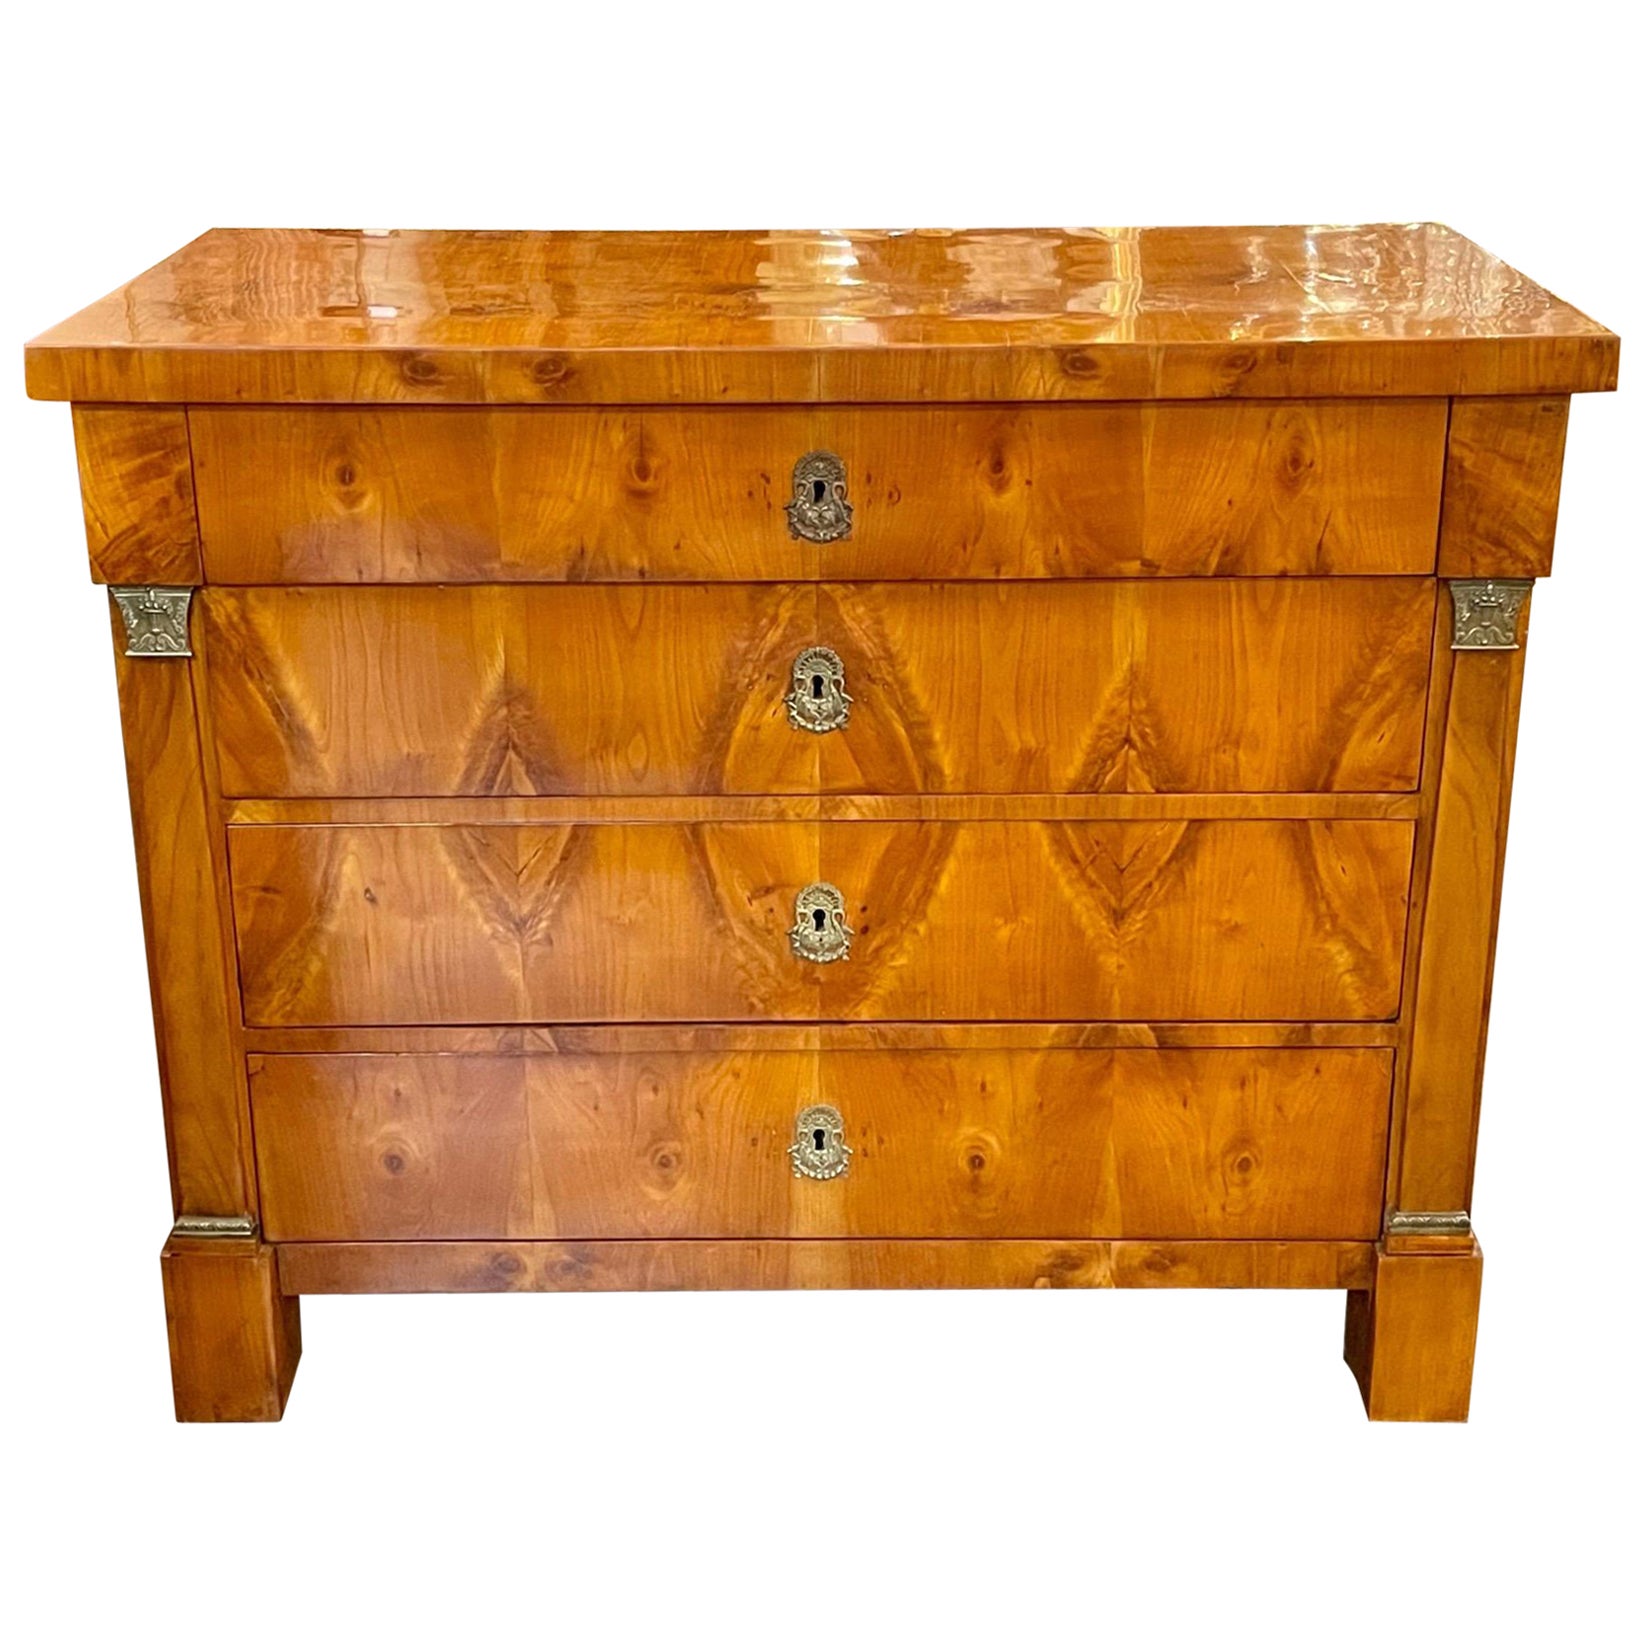 19th Century Austrian Empire Style Walnut Commode For Sale